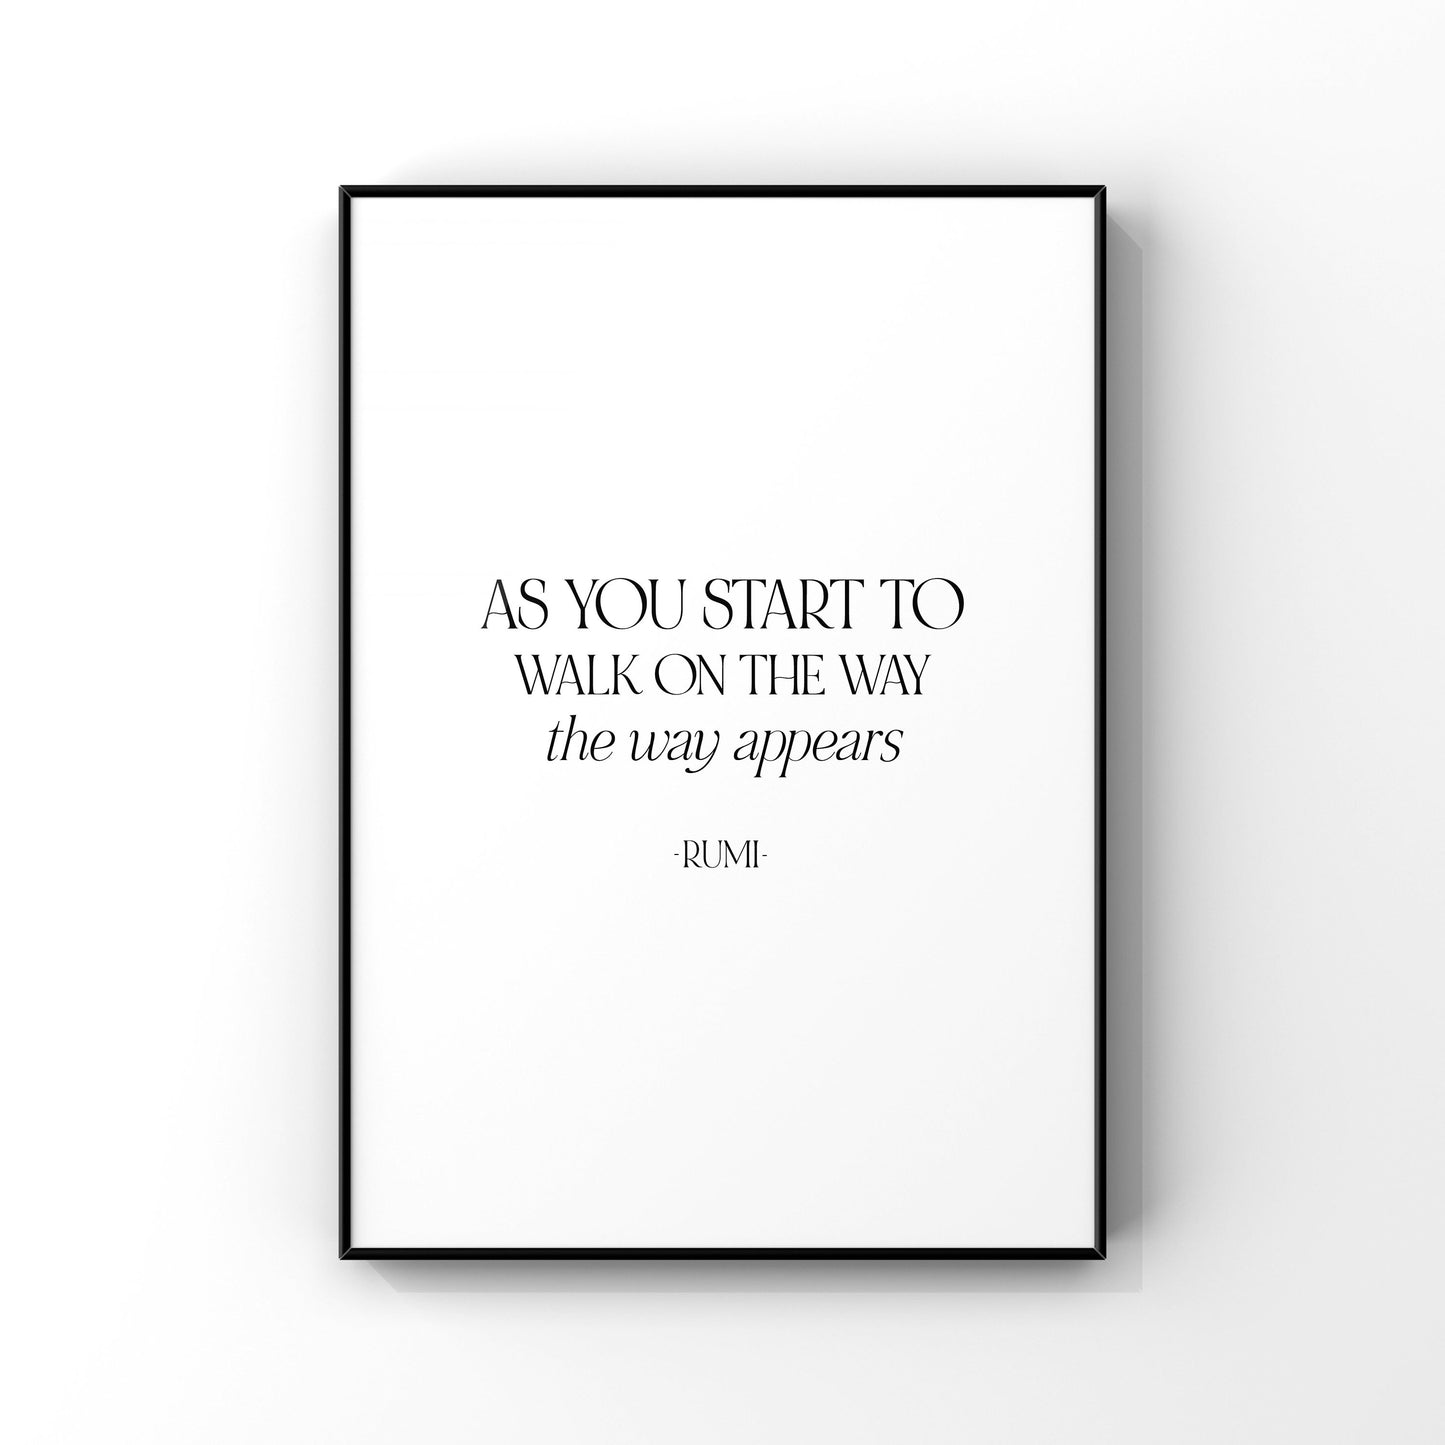 As you start to walk on the way the way appears,Rumi quote,Inspirational quote,Inspirational print,Wall decor,Positive affirmations